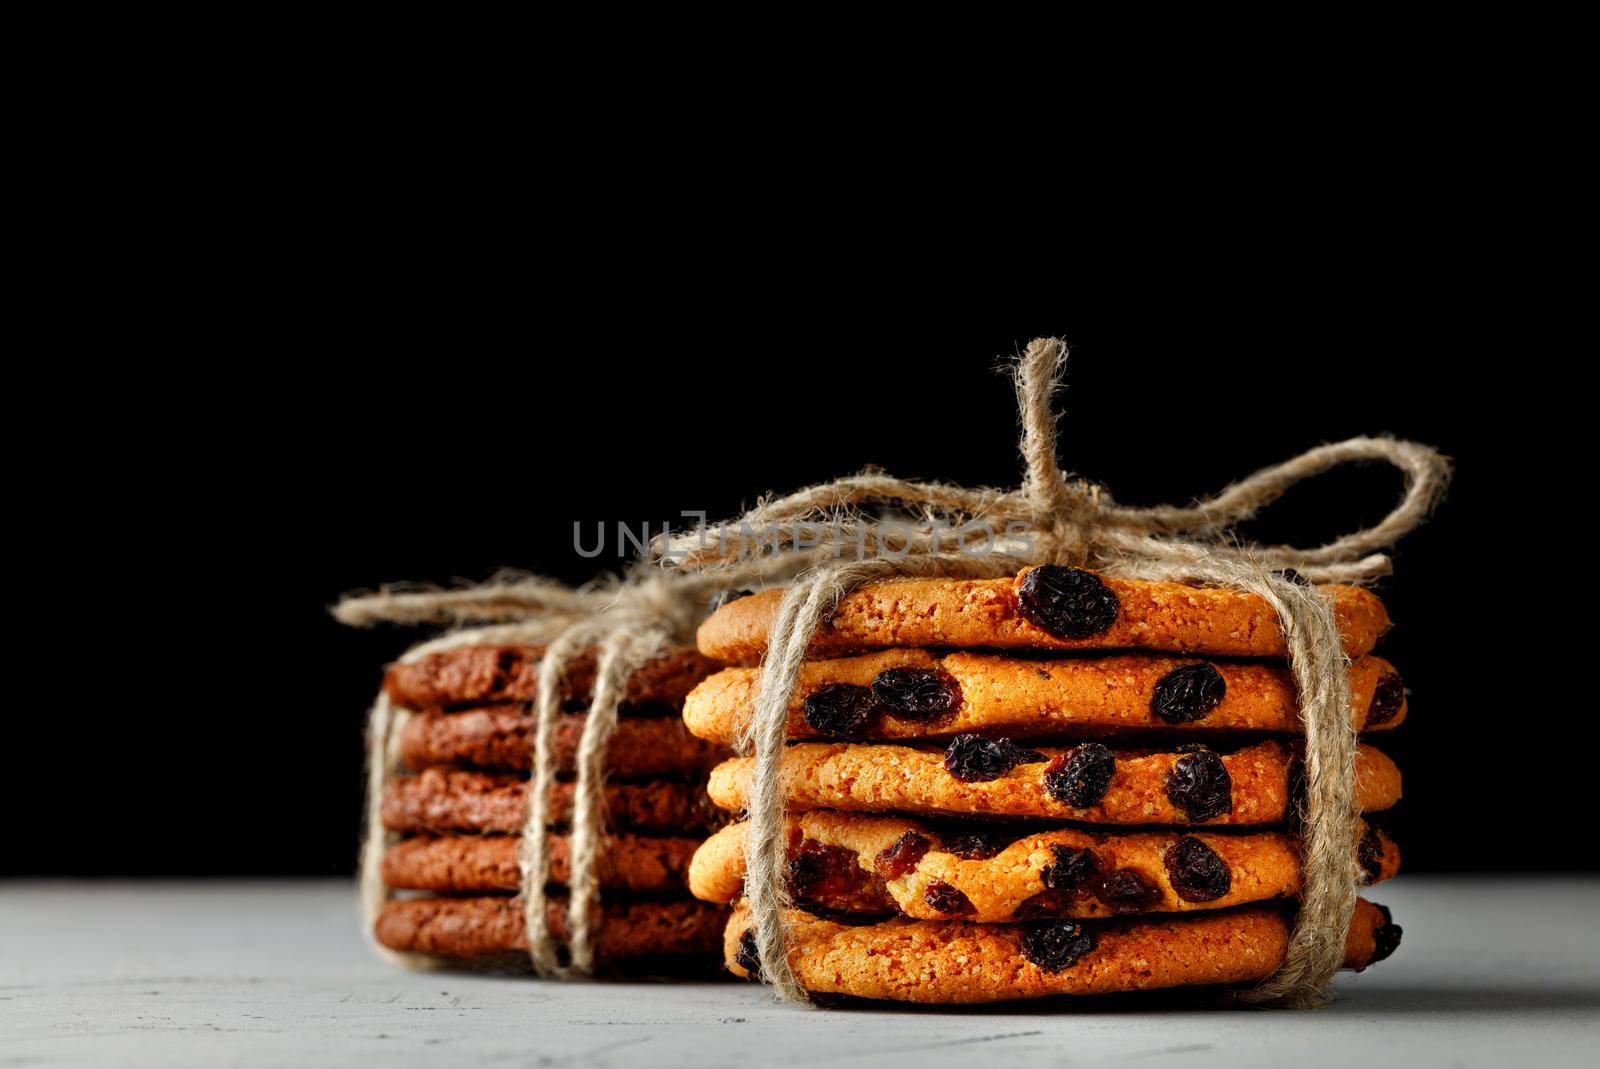 Stacks of homemade oatmeal and chocolate biscuits tied with a rope lie on a gray concrete surface against a black background. Close-up, copy space. by Sergii